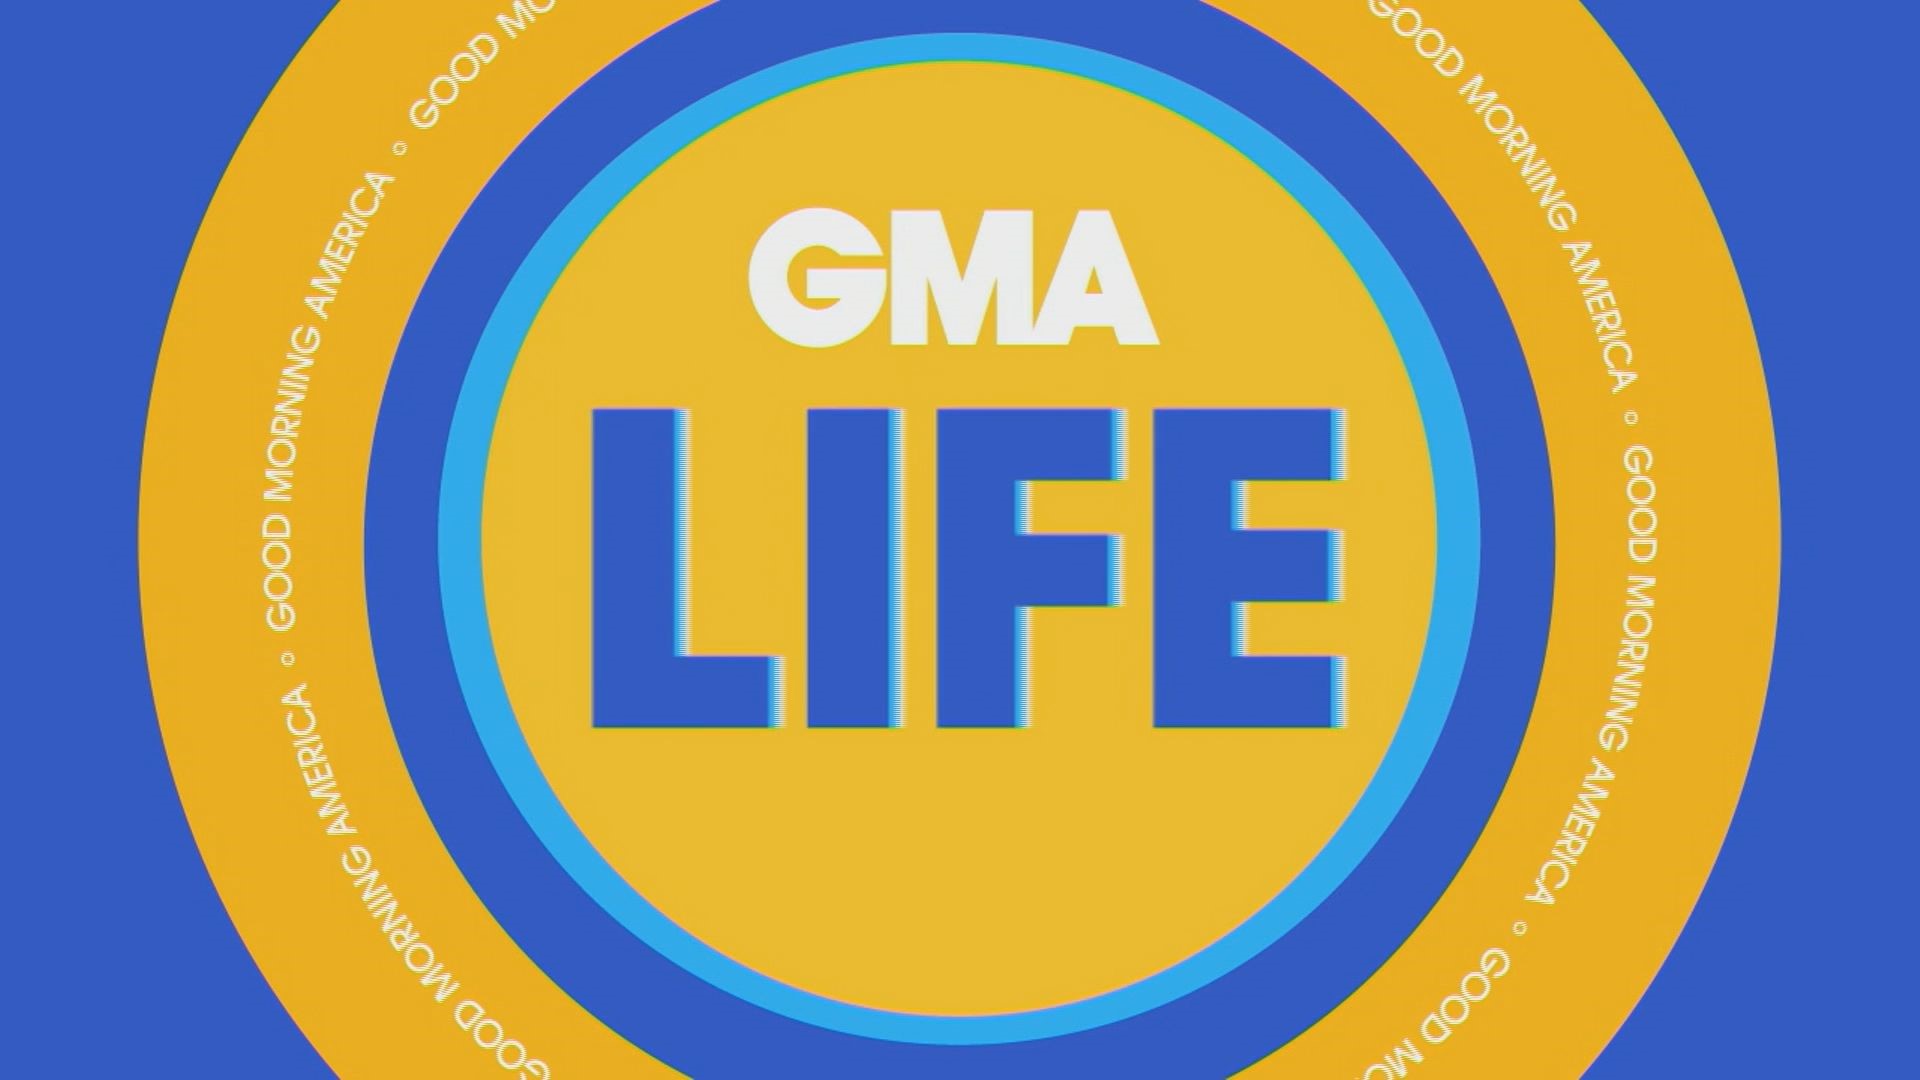 In GMA Life this week: Special Deals for Mother’s Day, a behind-the-scenes look at the new Broadway musical “Shucked” and we play Ask me Anything with Chris Evans!